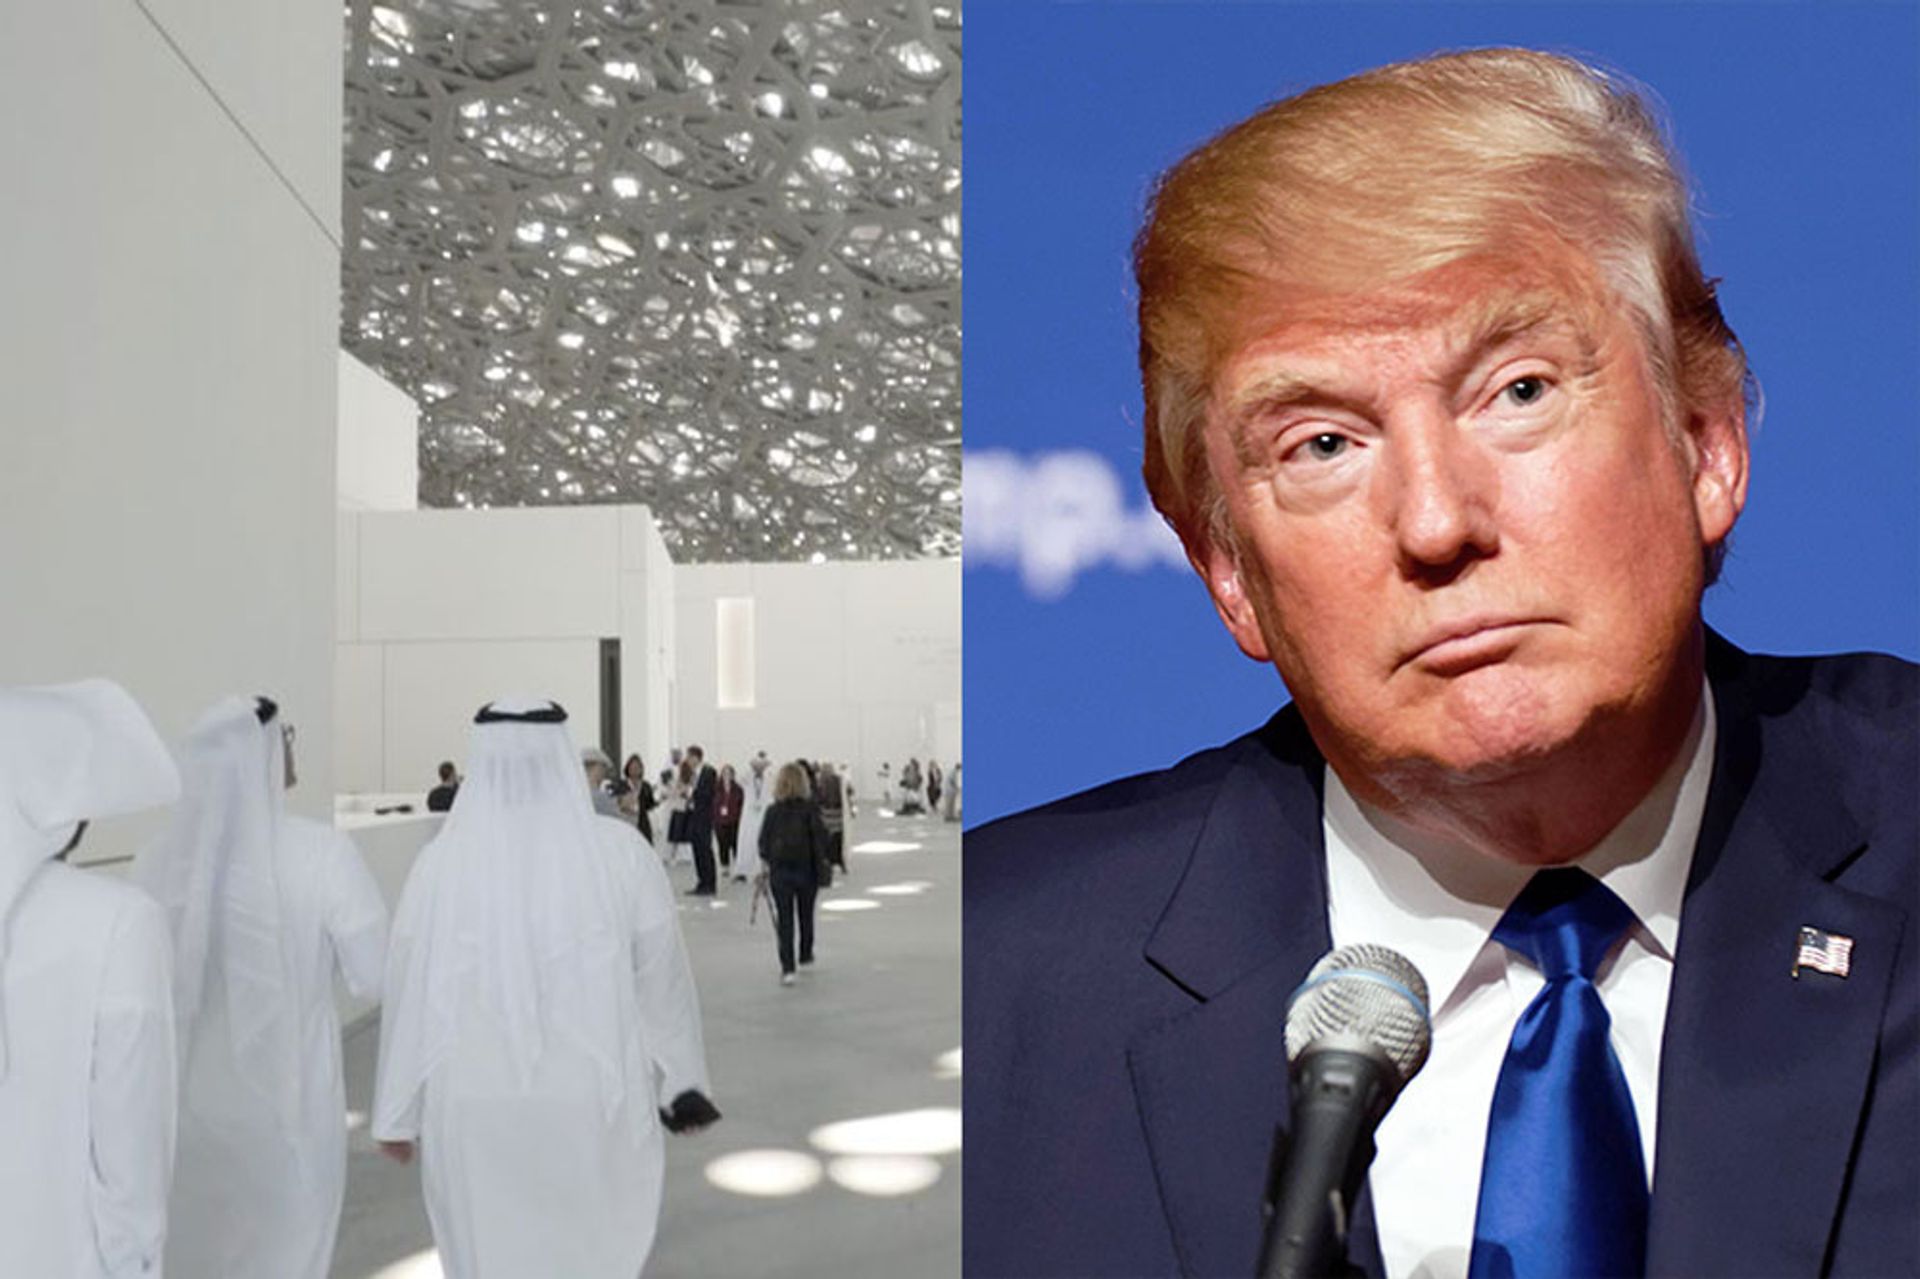 The Louvre Abu Dhabi was a recurring highlight of the year, Trump's presidency a recurring lowlight David Clack (L), Wikimedia Commons (R)